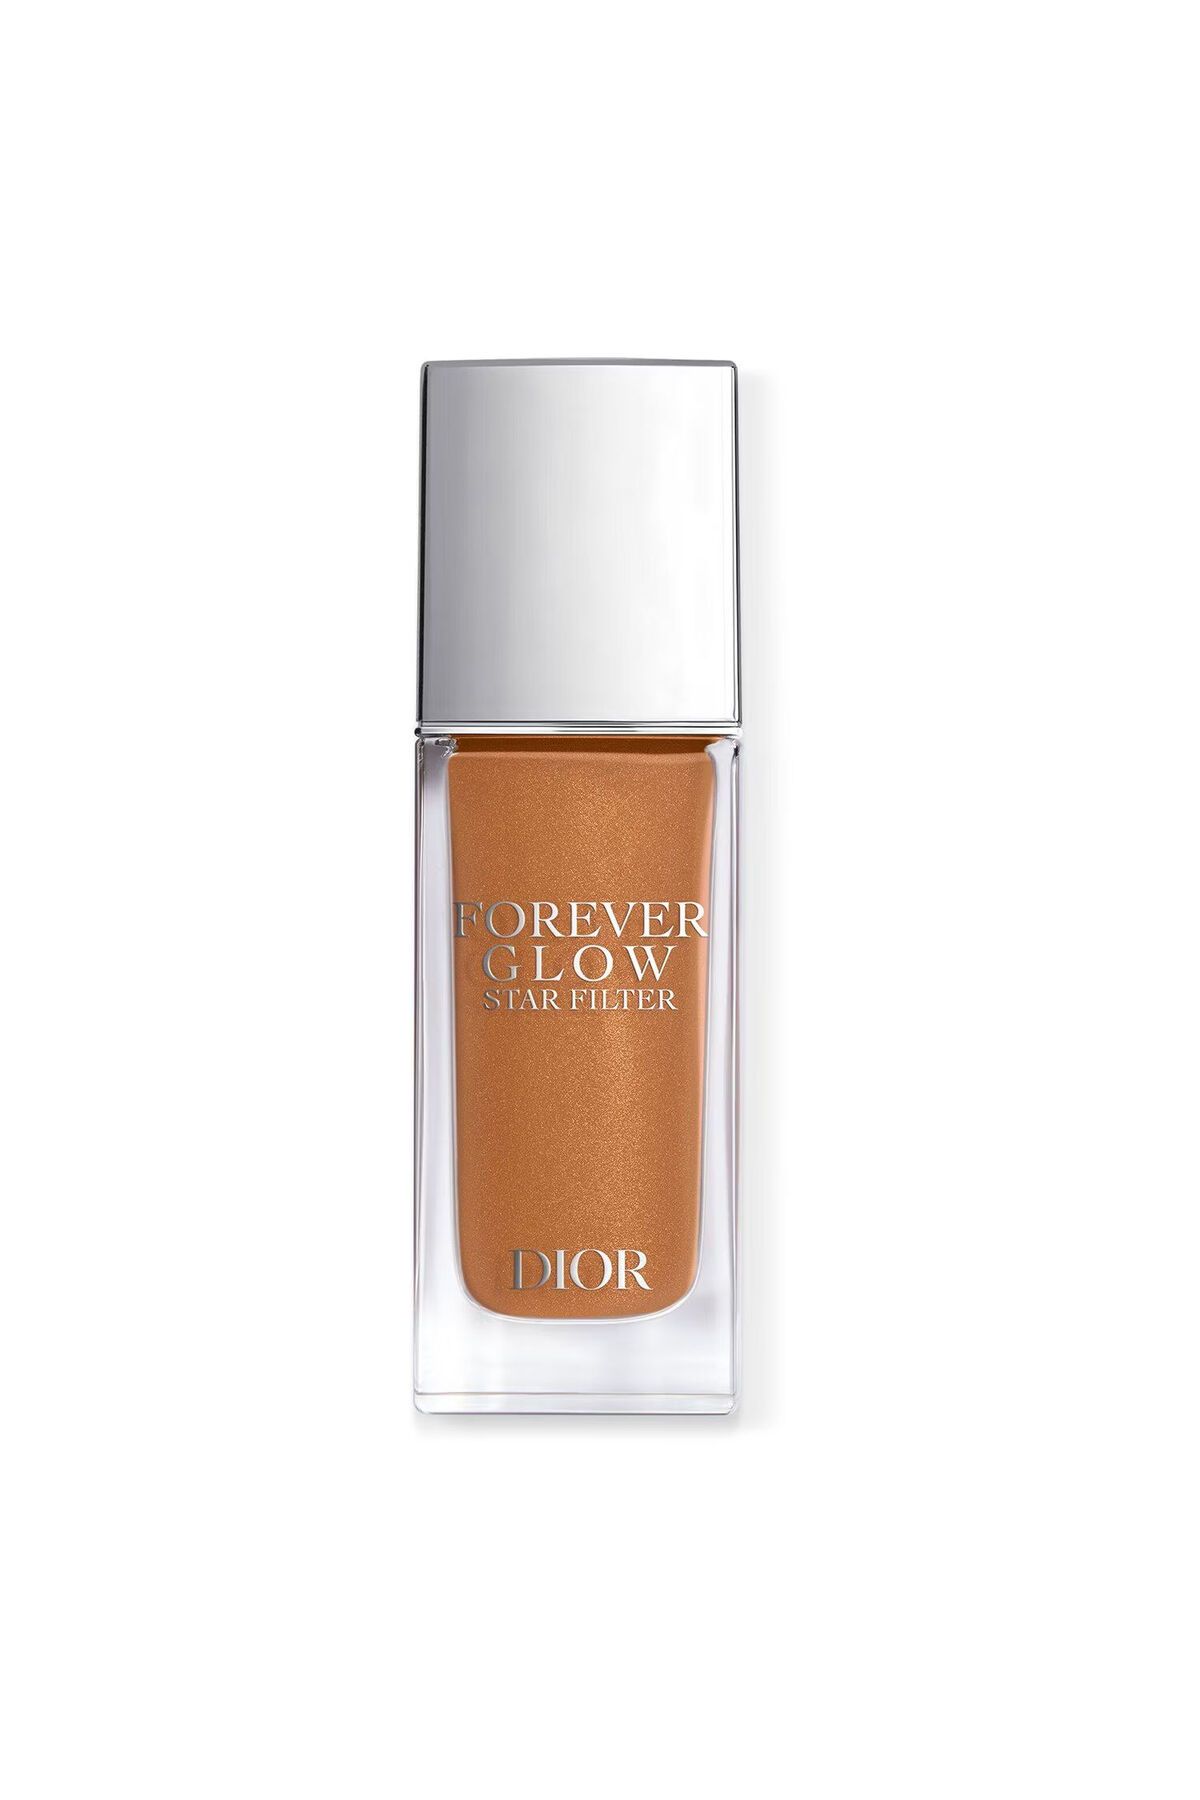 Dior Forever Glow Star Filter - Complexion Sublimating Fluid and Highlighter 30Ml